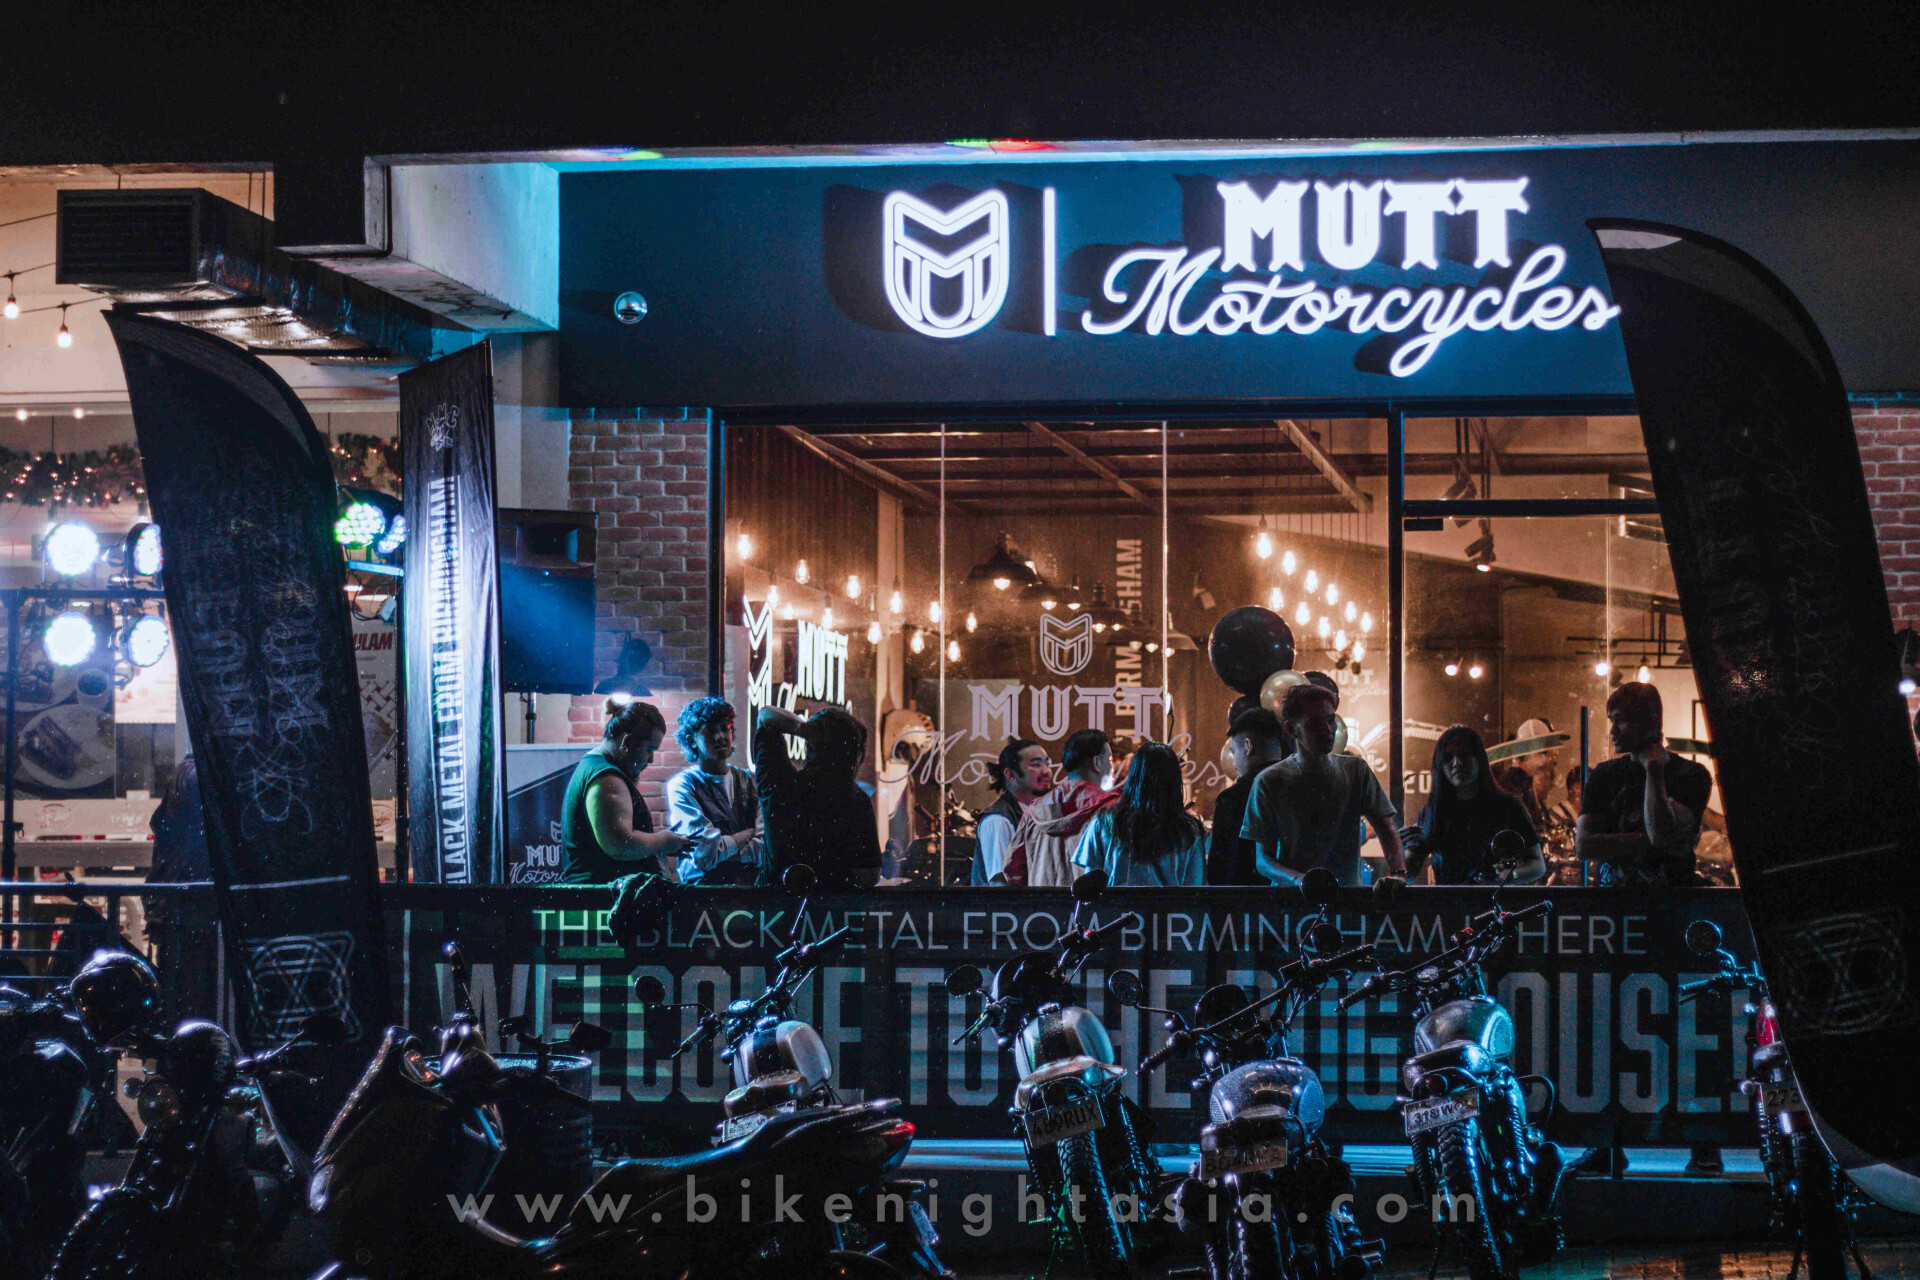 Welcome to the Dog House: Grand Opening of Mutt Motorcycles in White Plains, Quezon City